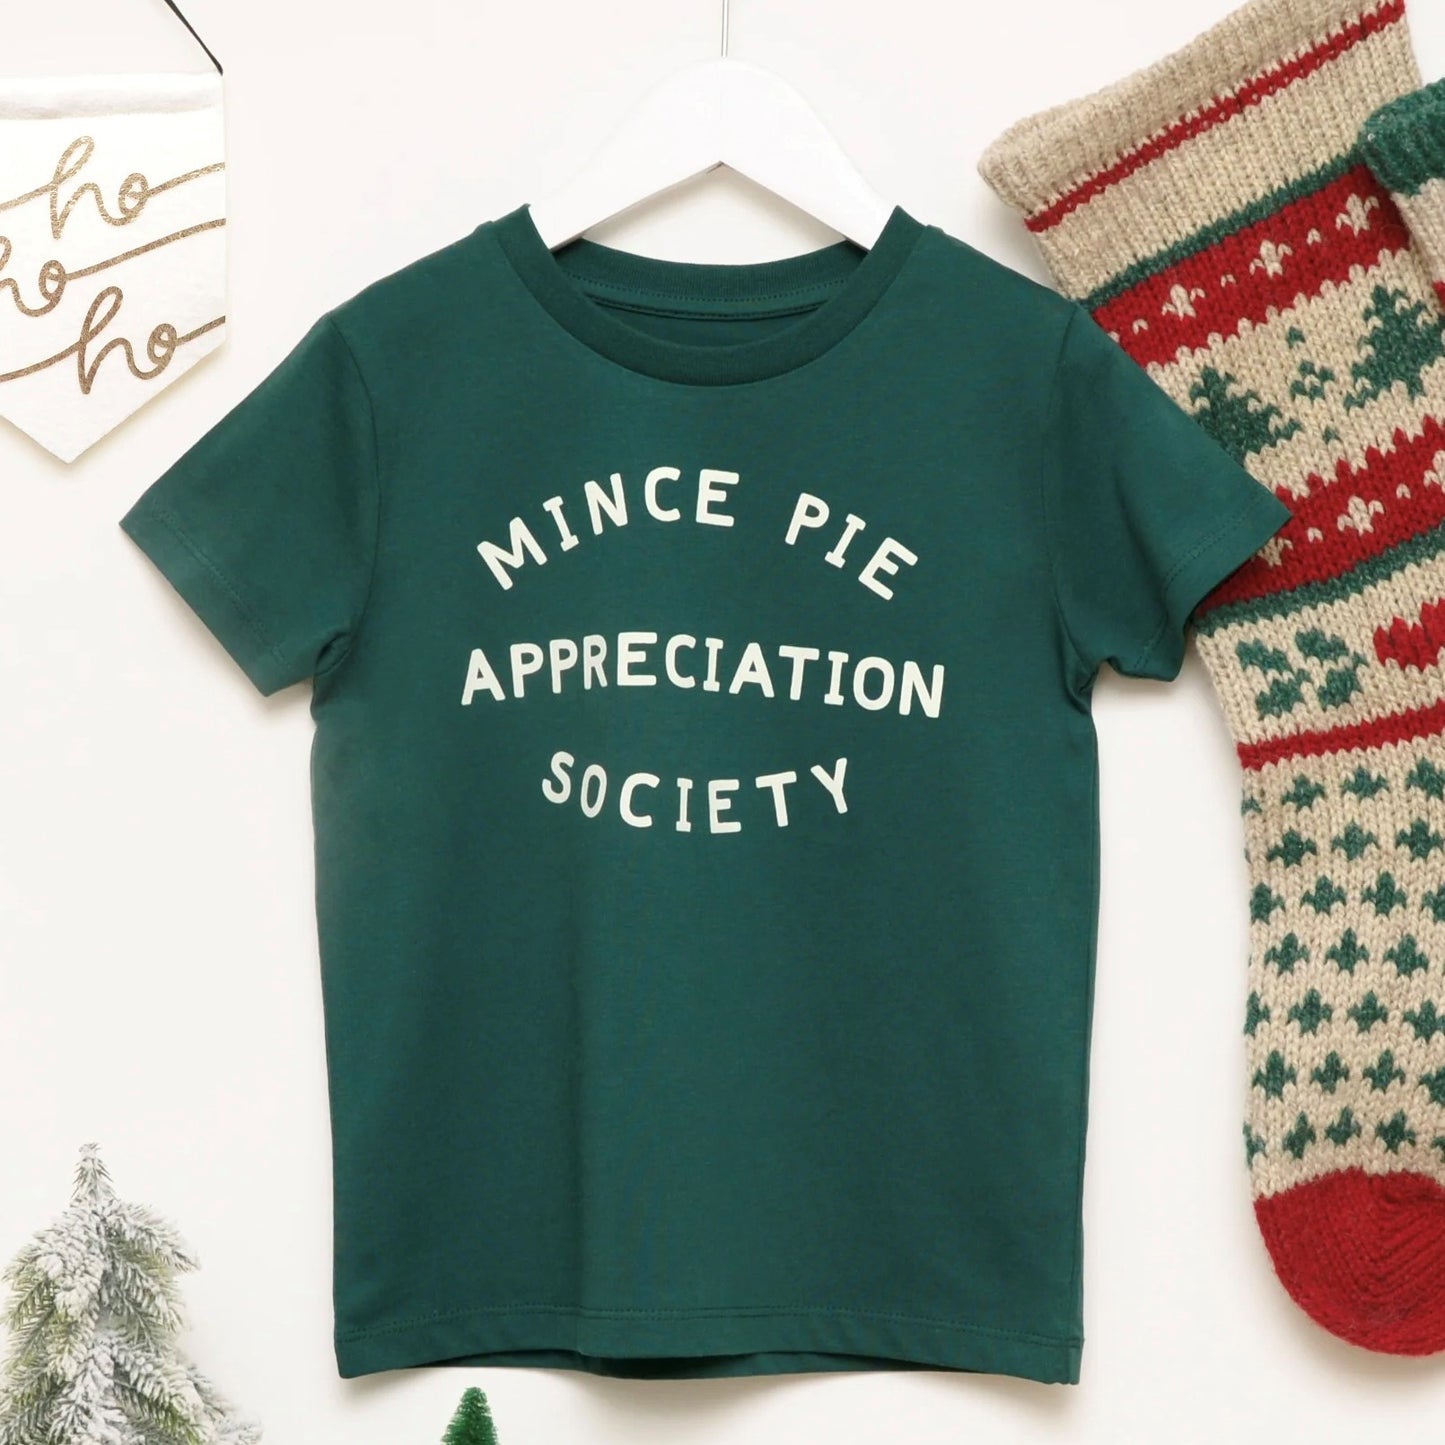 mince pie appreciation society tee by alphabet bags at whippersnappers online 